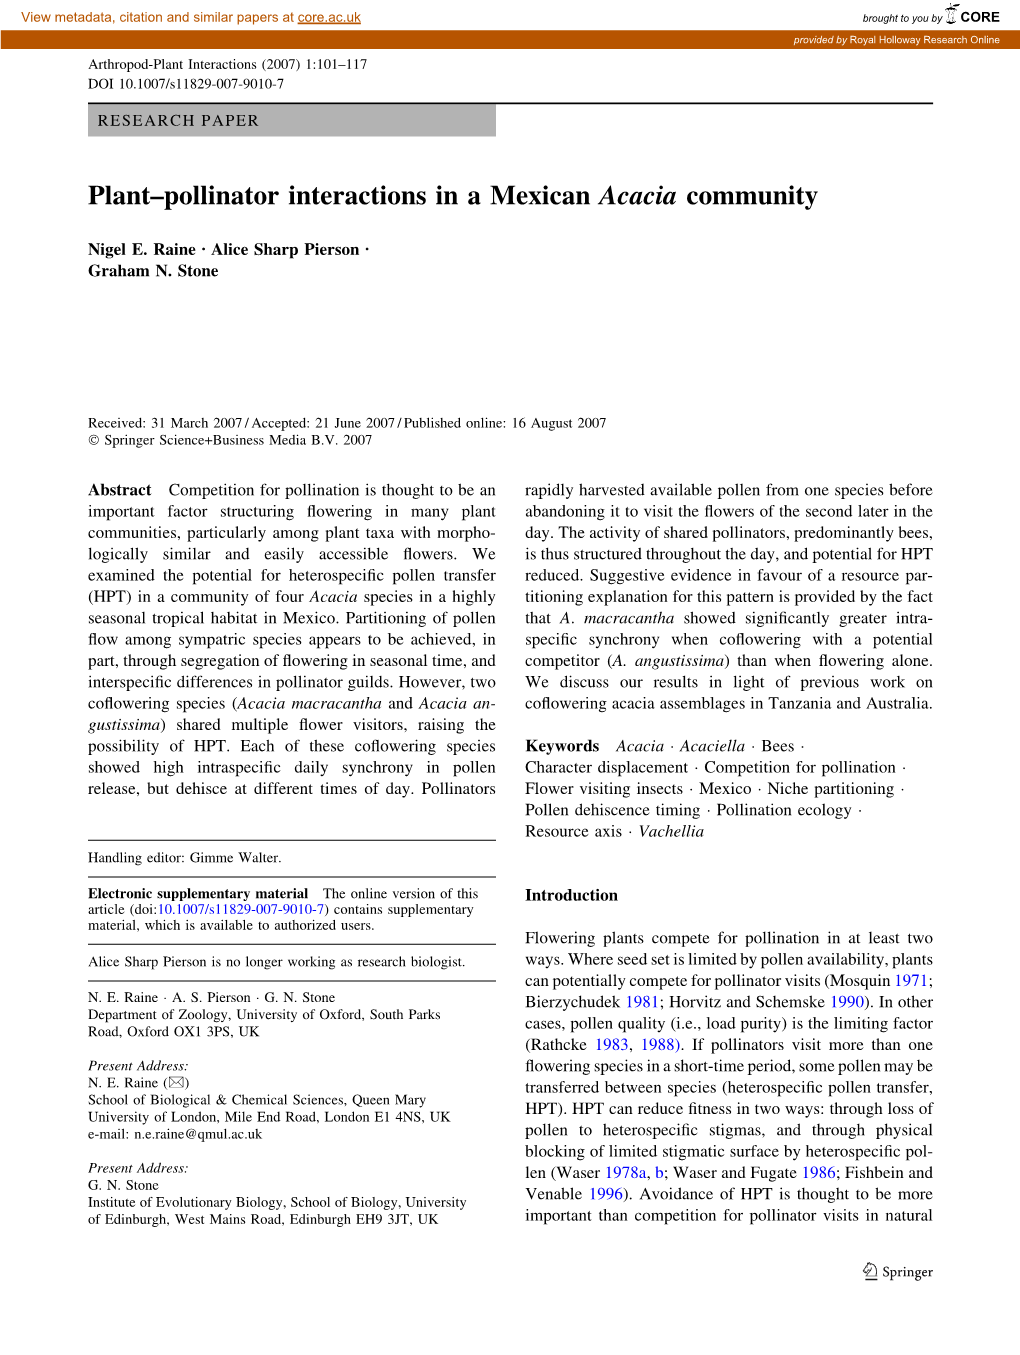 Plant–Pollinator Interactions in a Mexican Acacia Community